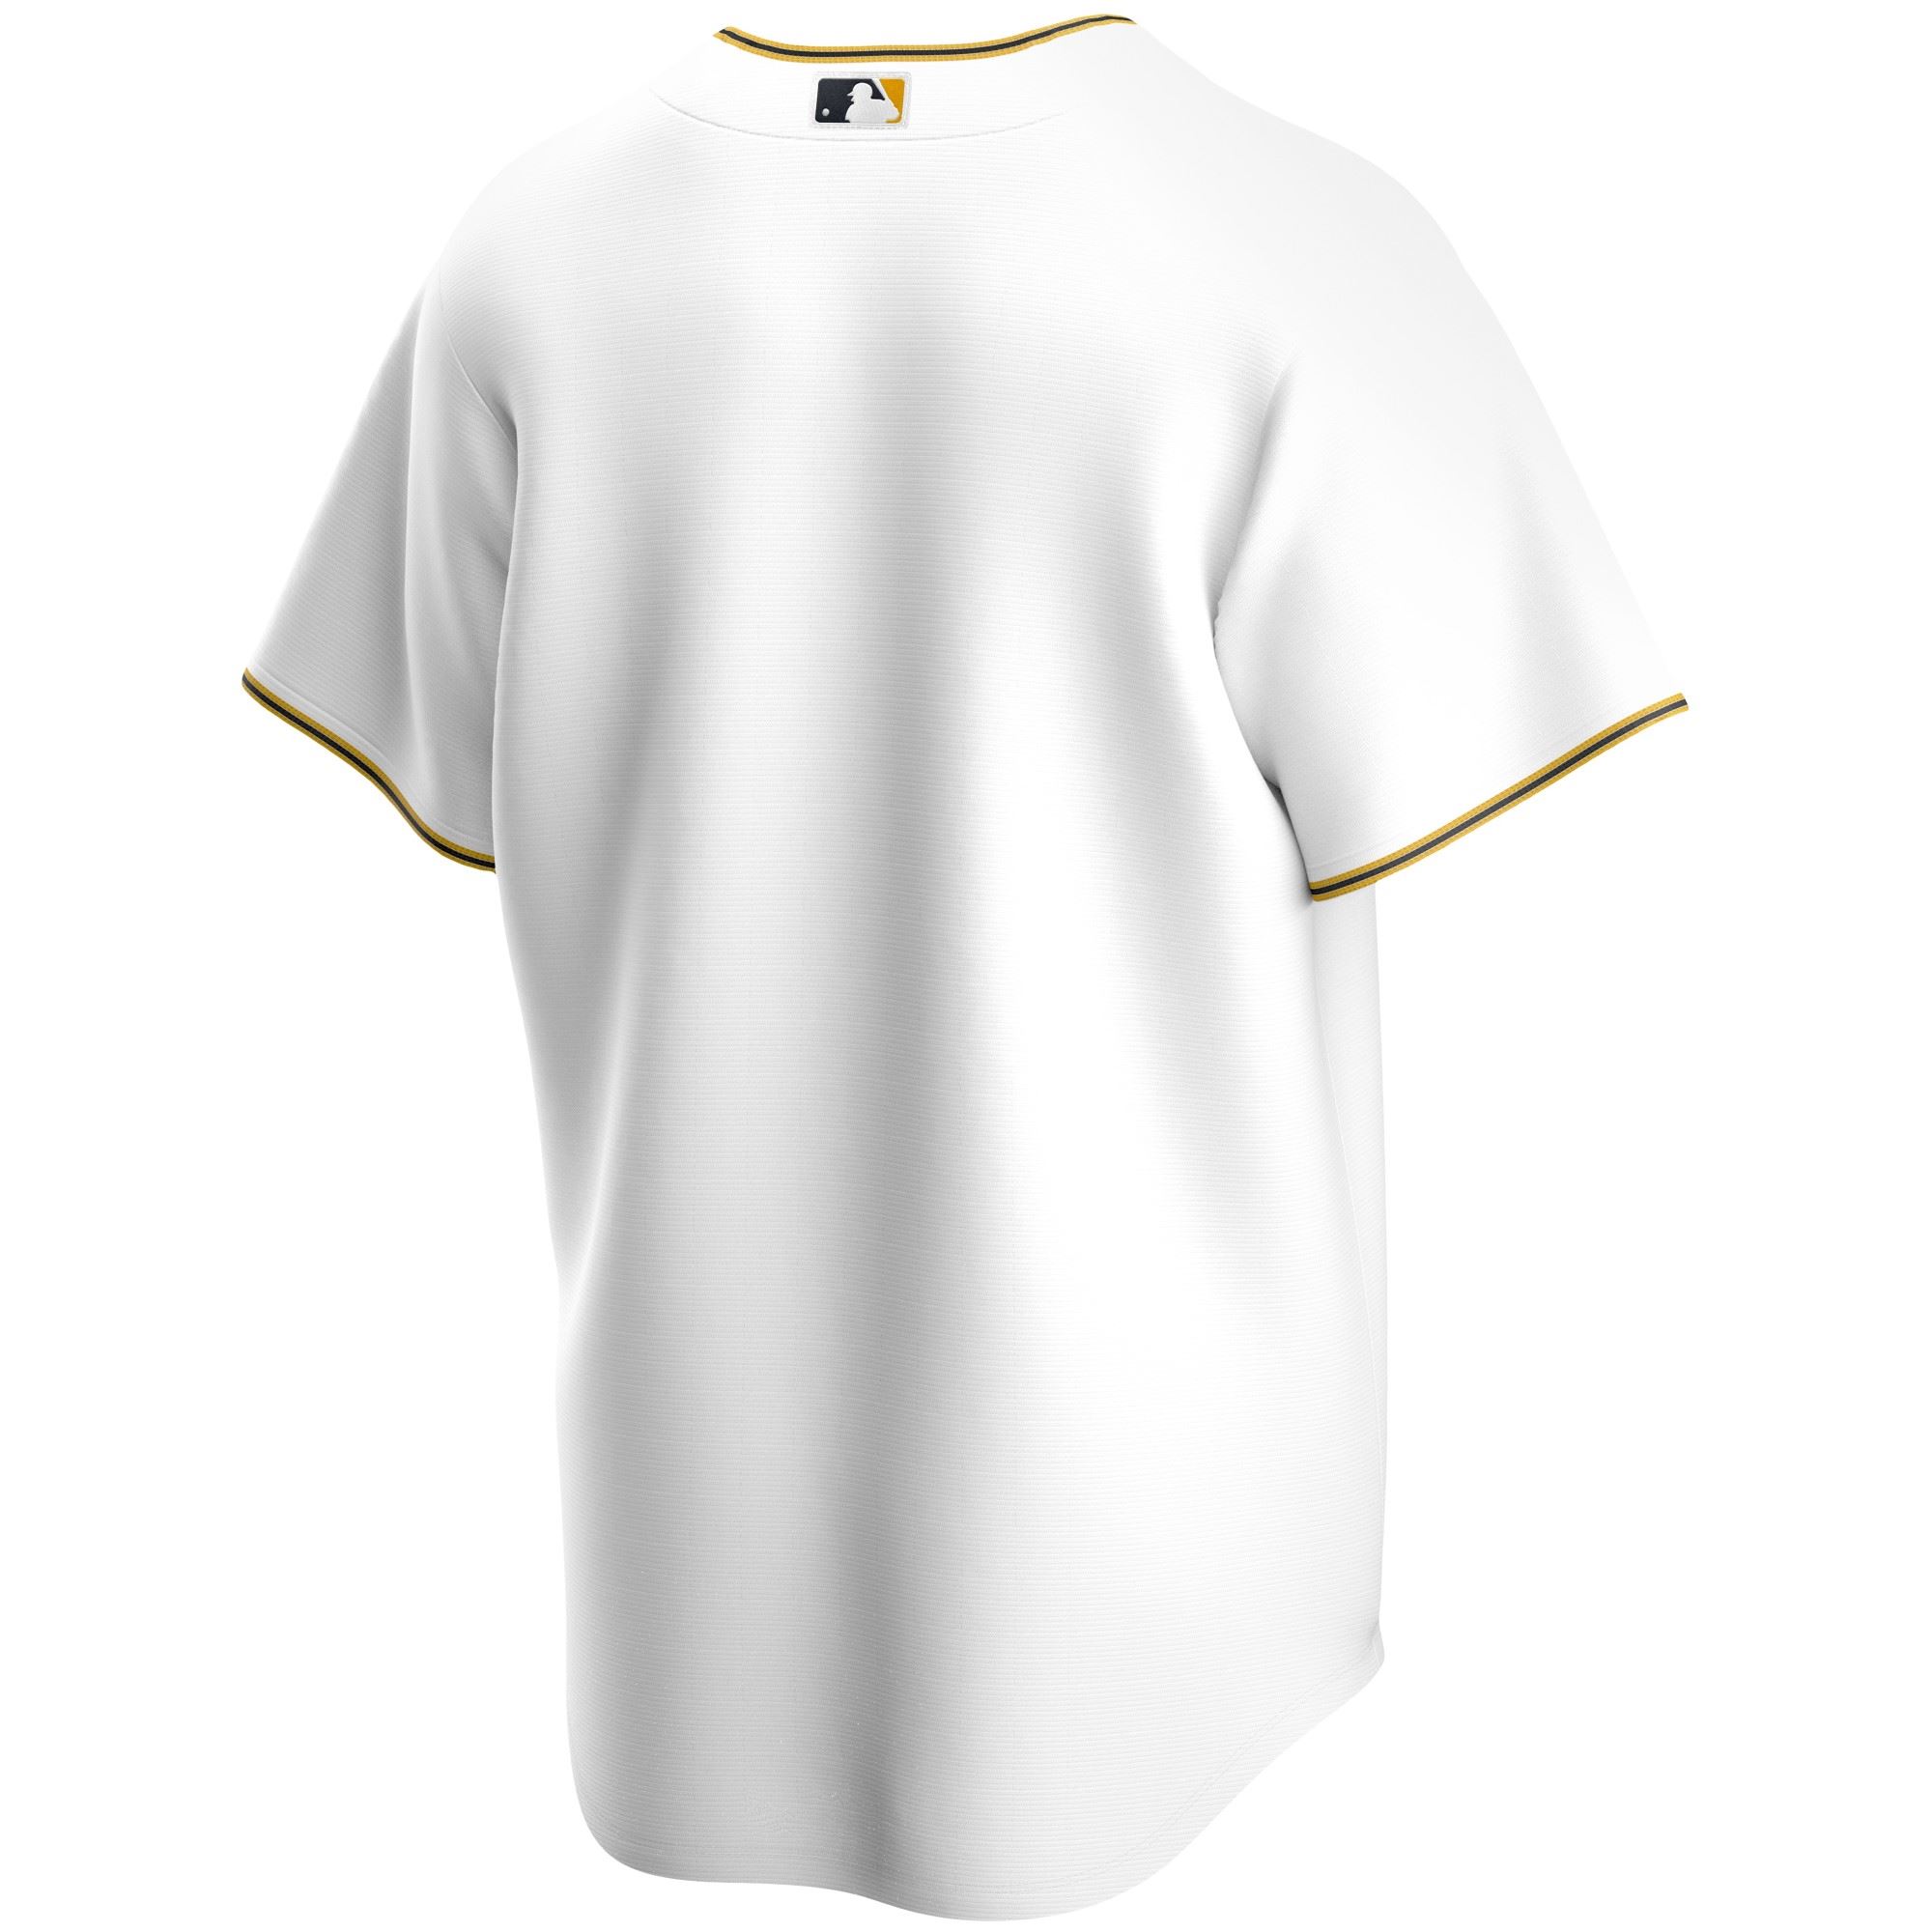 Pittsburgh Pirates Official MLB Replica Home Jersey White Nike